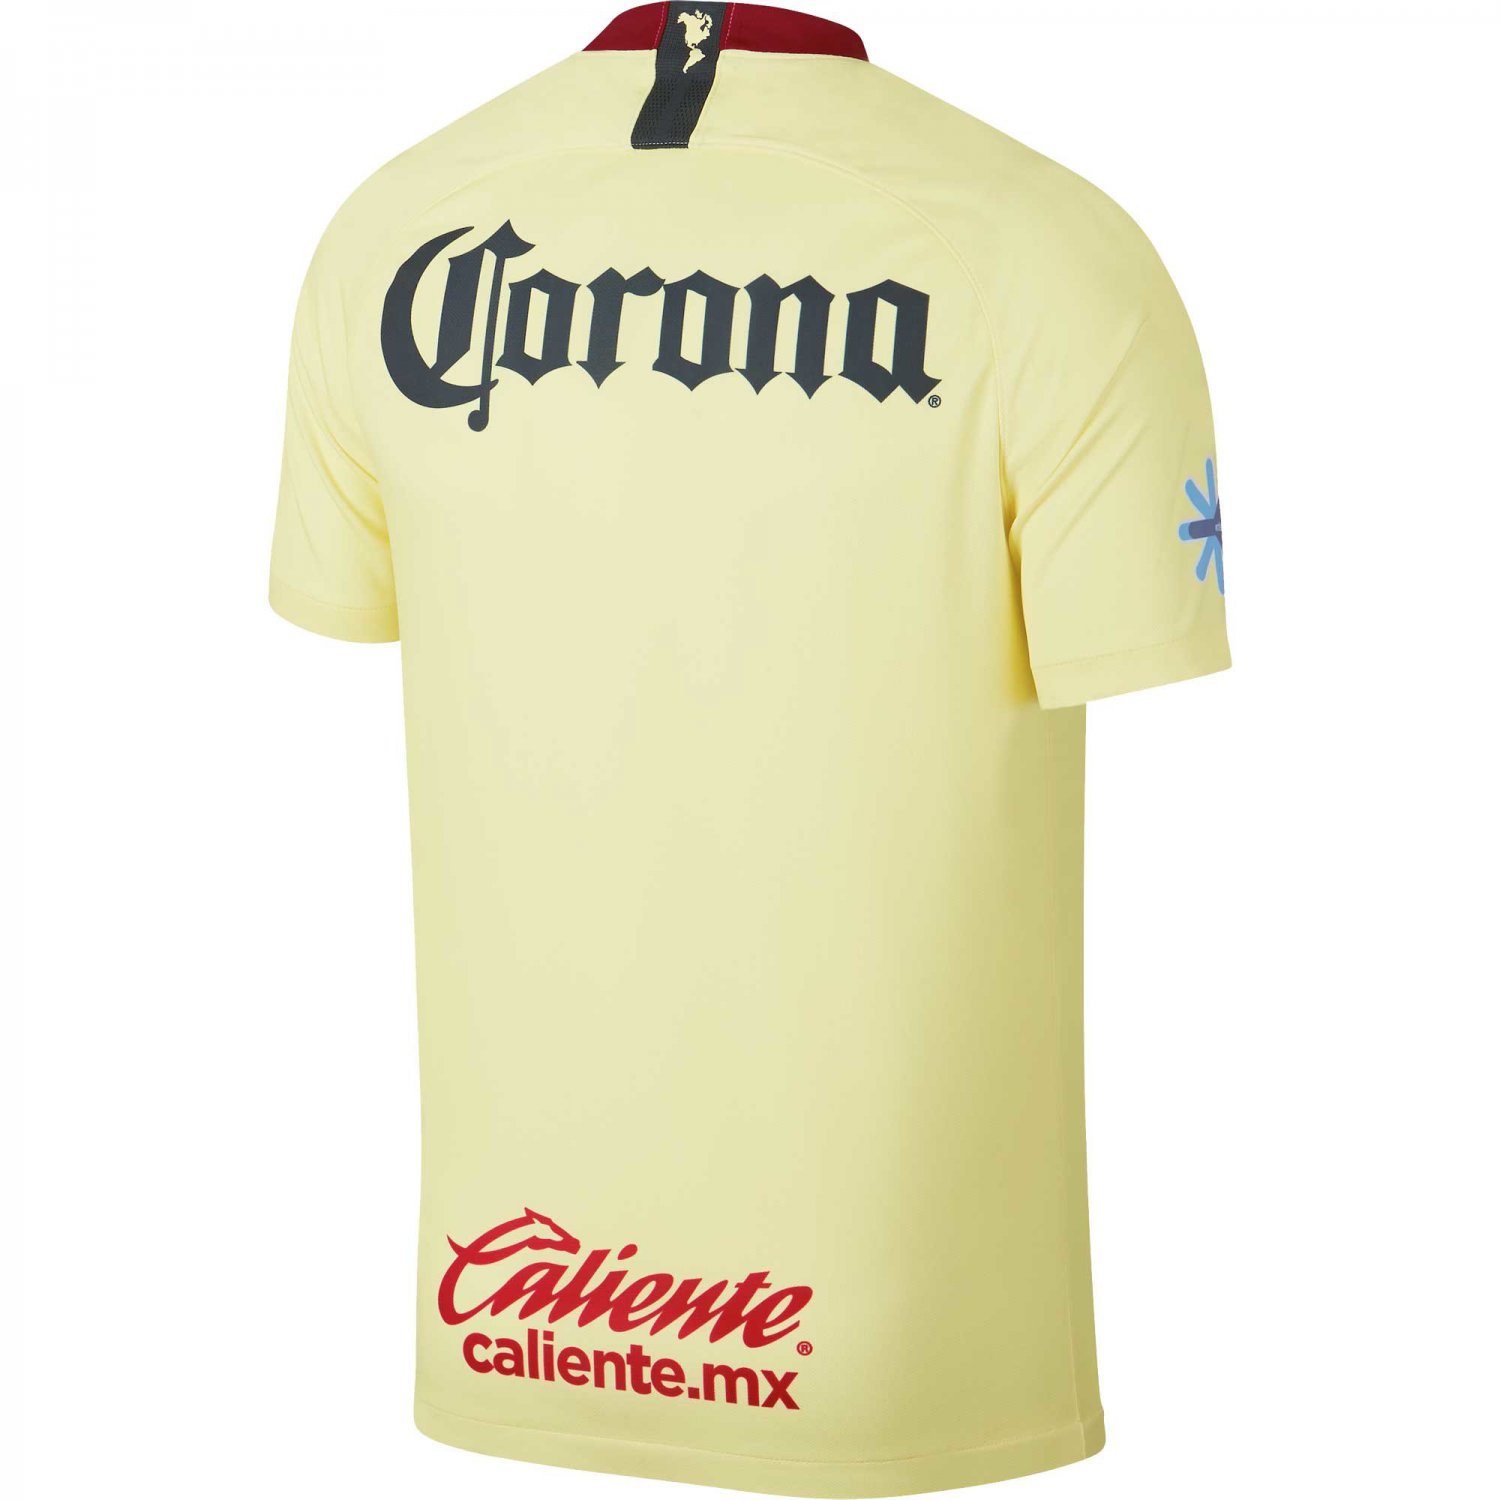 Mexico Club America 18/19 Home Men's Soccer Jersey Personalized Name ...